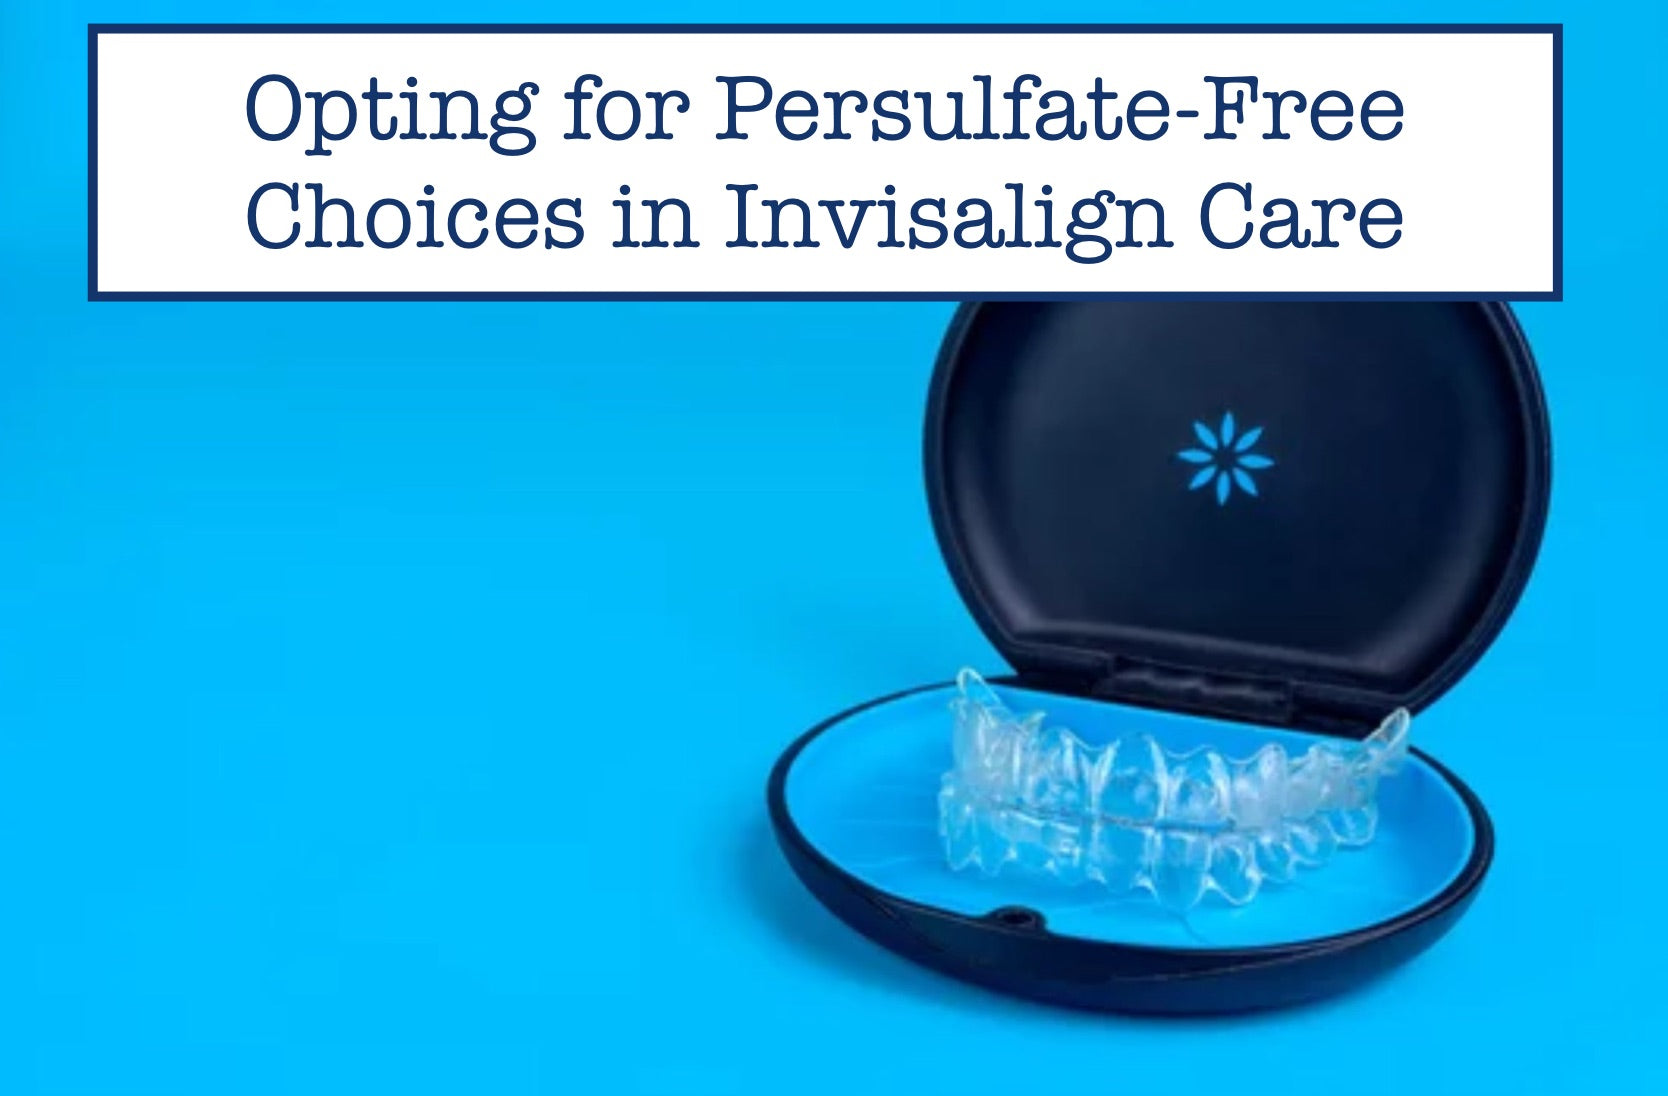 Opting for Persulfate-Free Choices in Invisalign Care